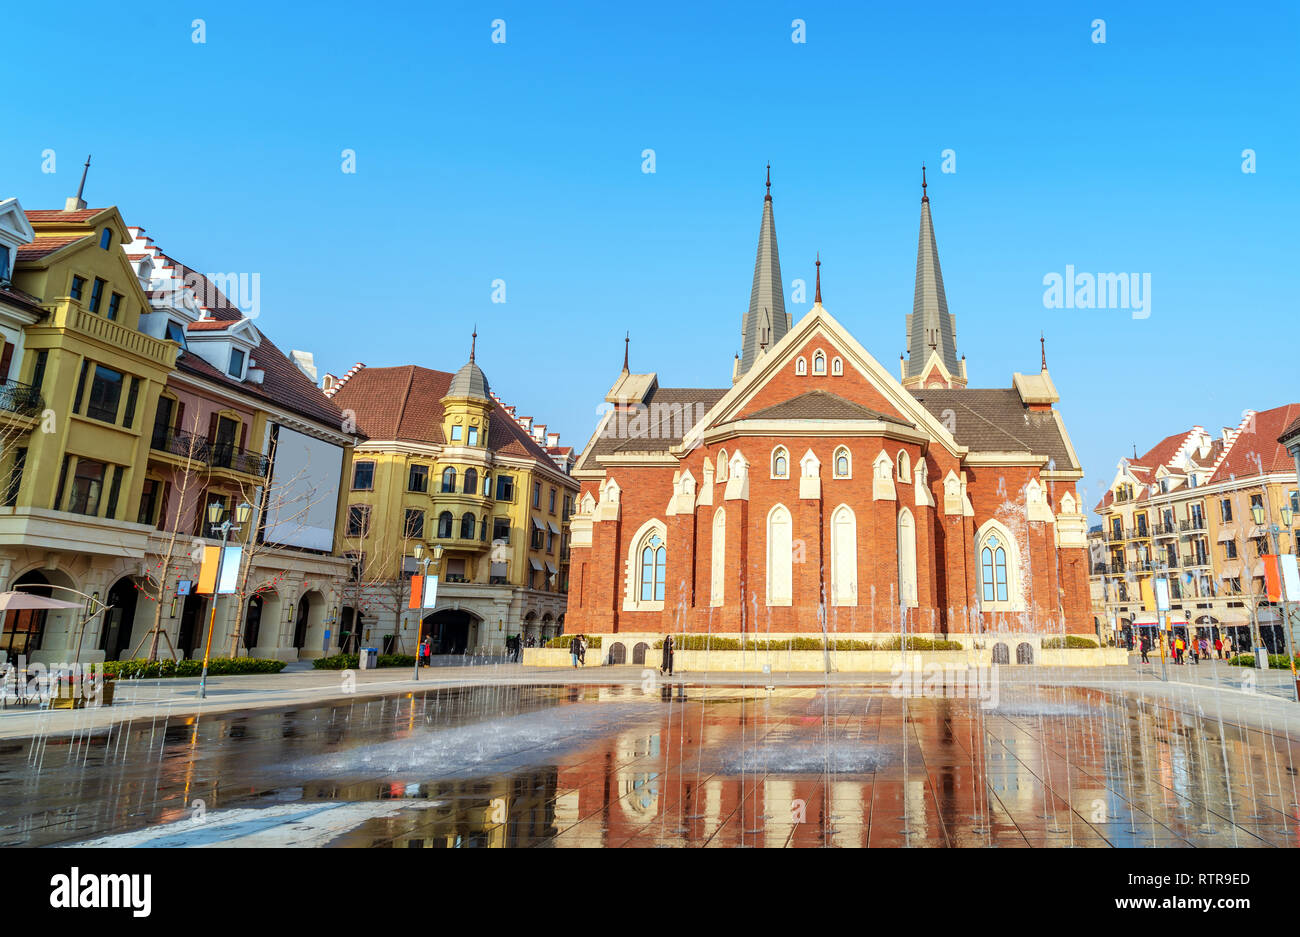 City square and church under the blue sky, Shanghai, China. Stock Photo